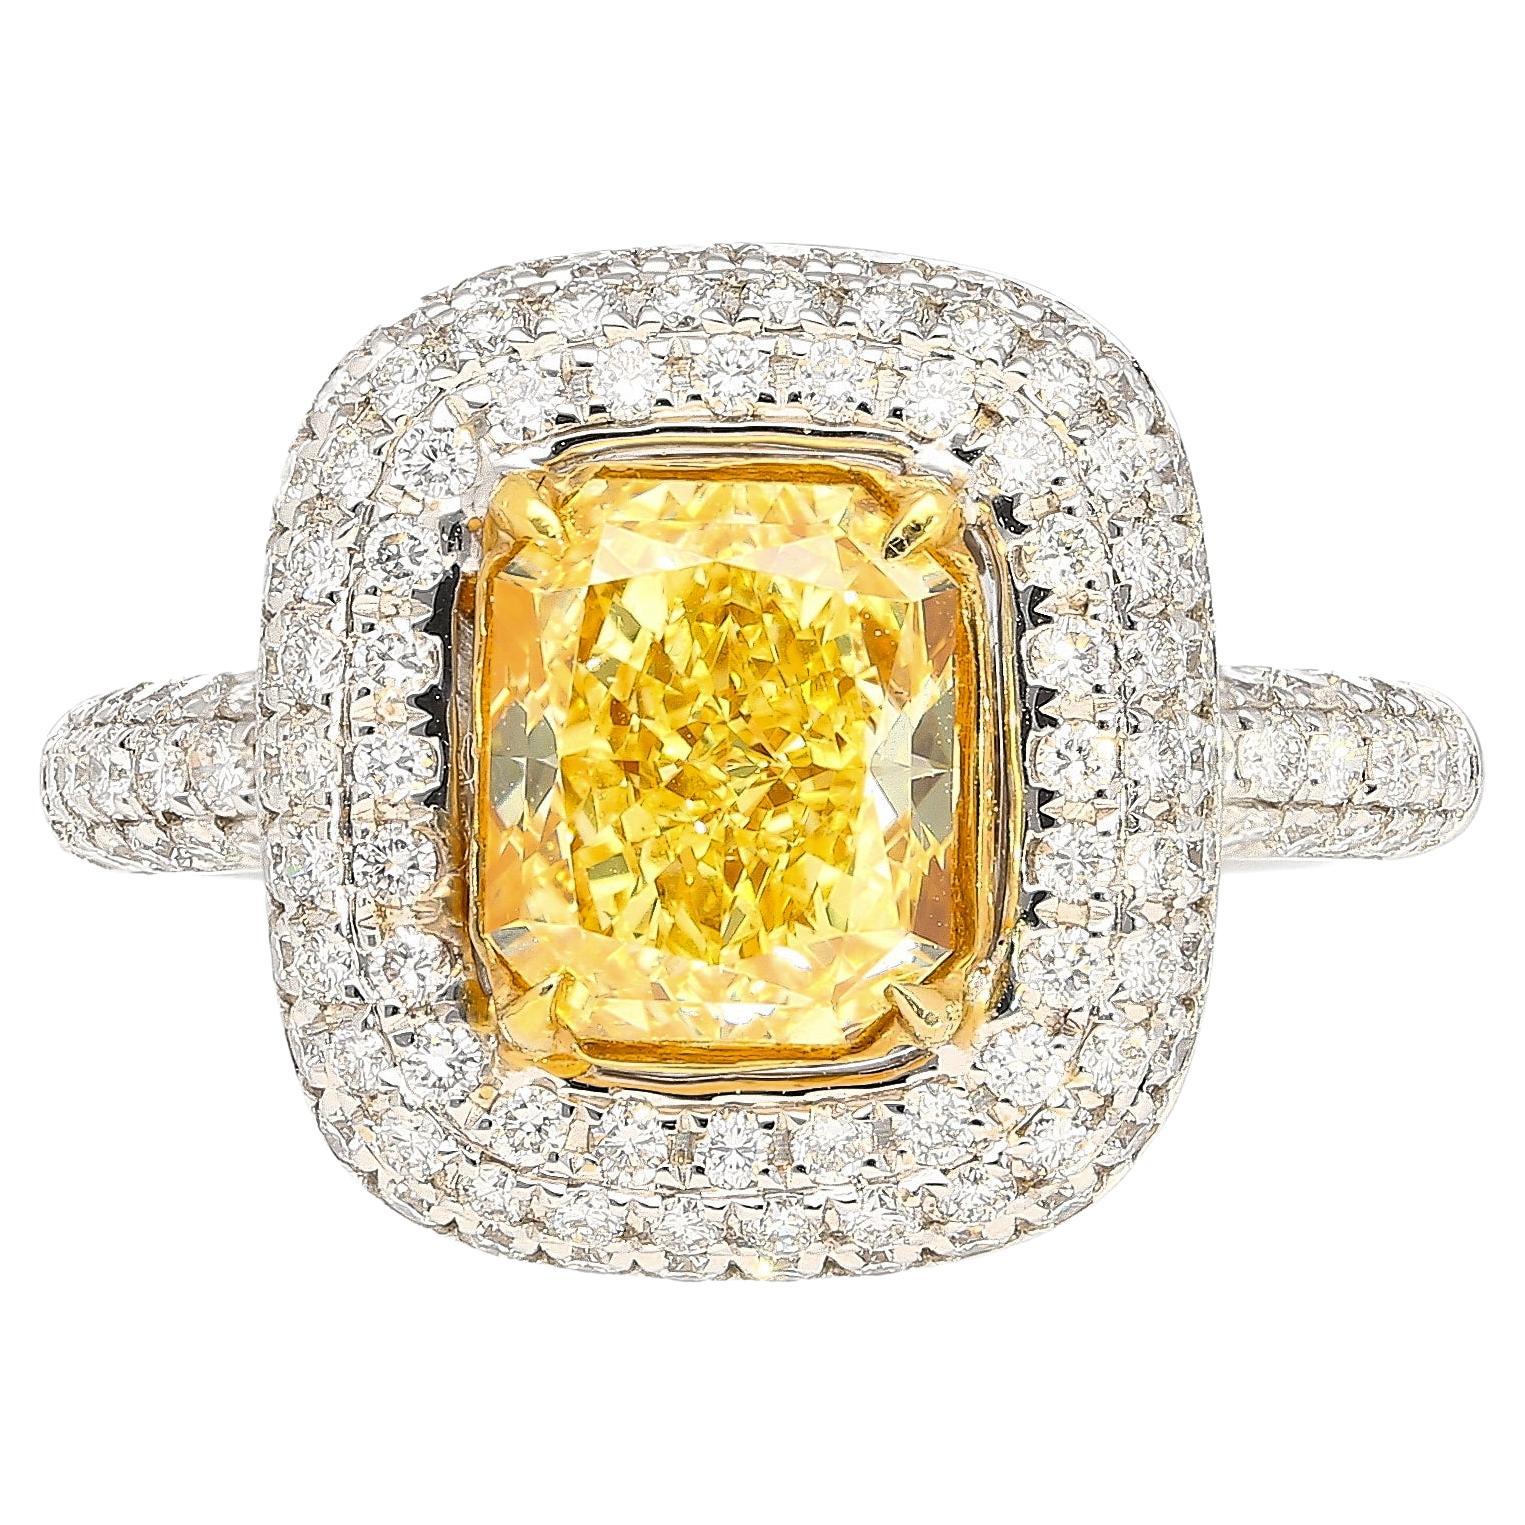 GIA Certified 2.35 Radiant Cut Fancy Yellow Diamond Ring in 18k White Gold For Sale